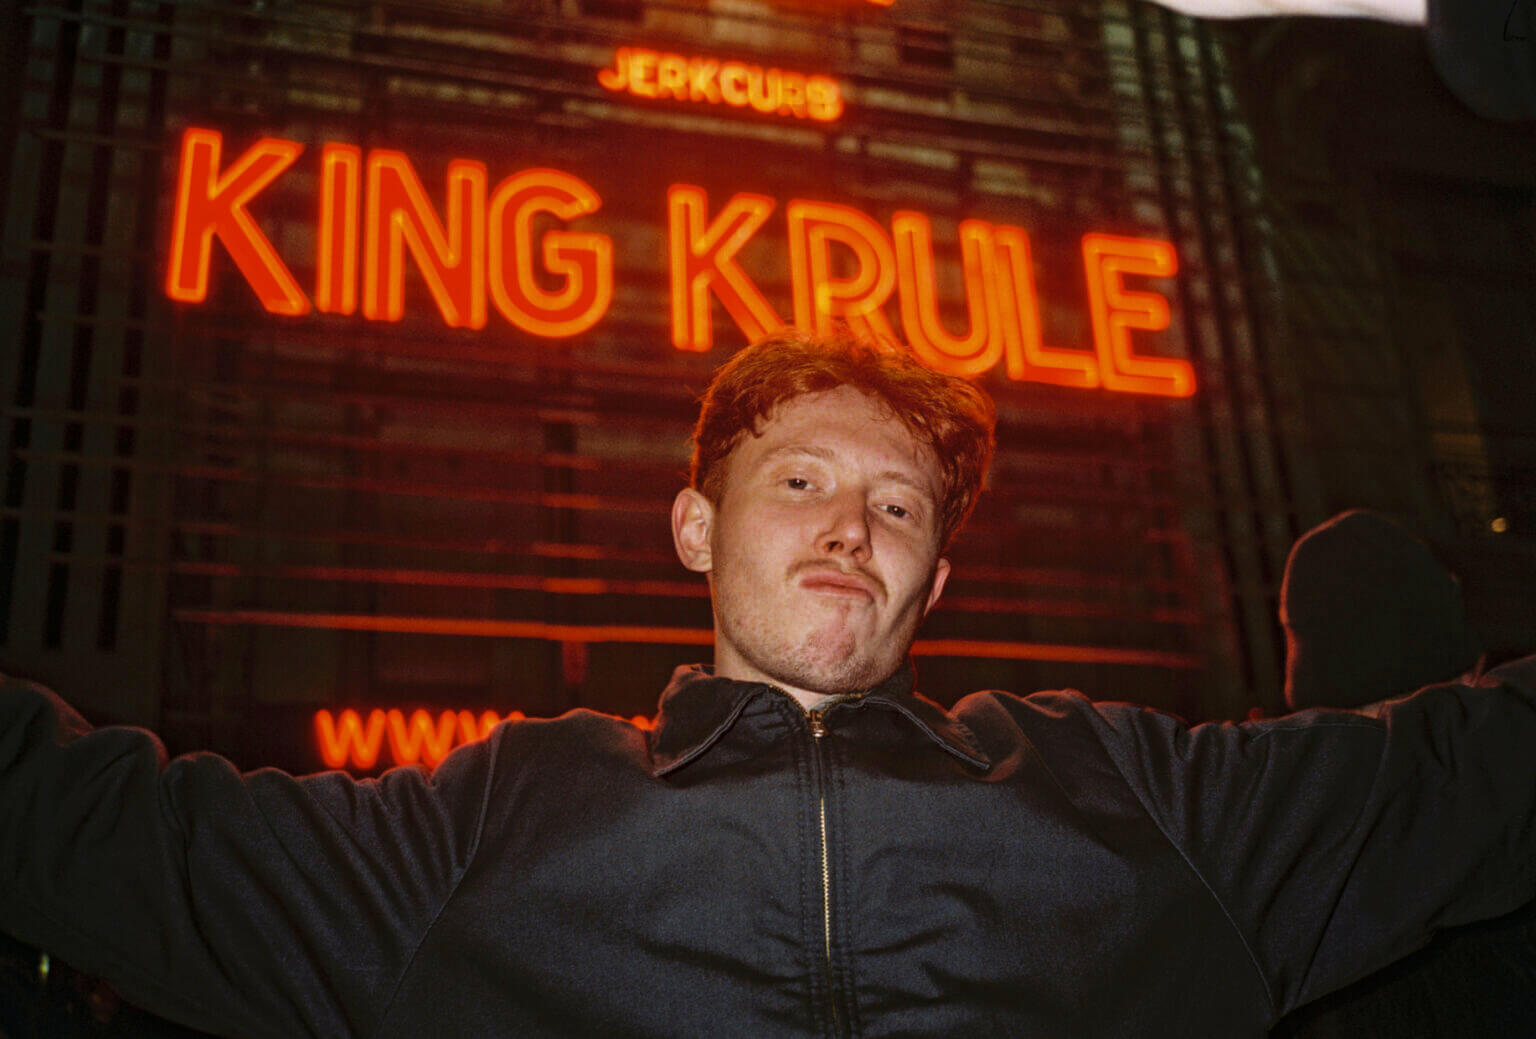 King Krule releases his new live album You Heat Me Up, You Cool Me Down, the album is accompanied by a live film